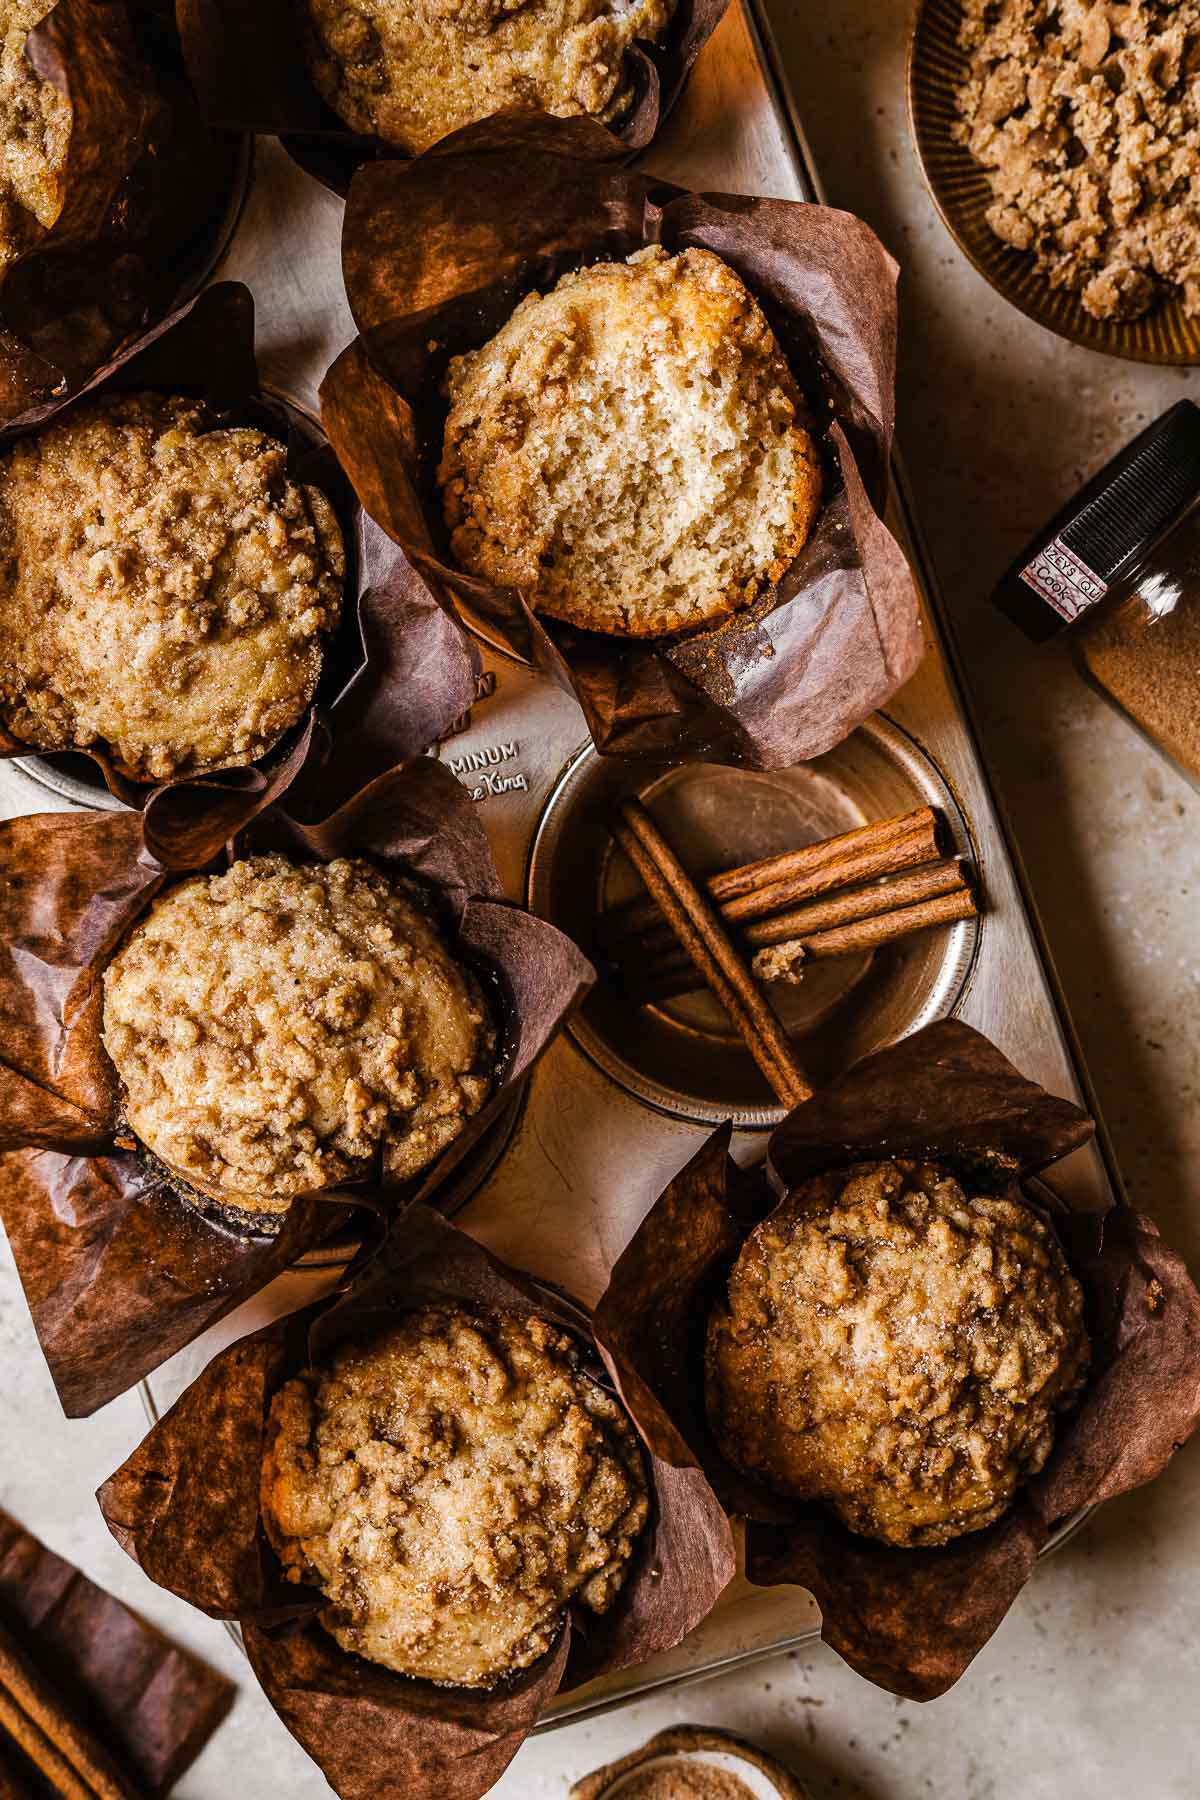 Cinnamon streusel muffins in brown parchment paper wrappers in a muffin tin. One muffin has been broken open to show the crumb inside. Three cinnamon sticks rest in an empty muffin tin cavity.